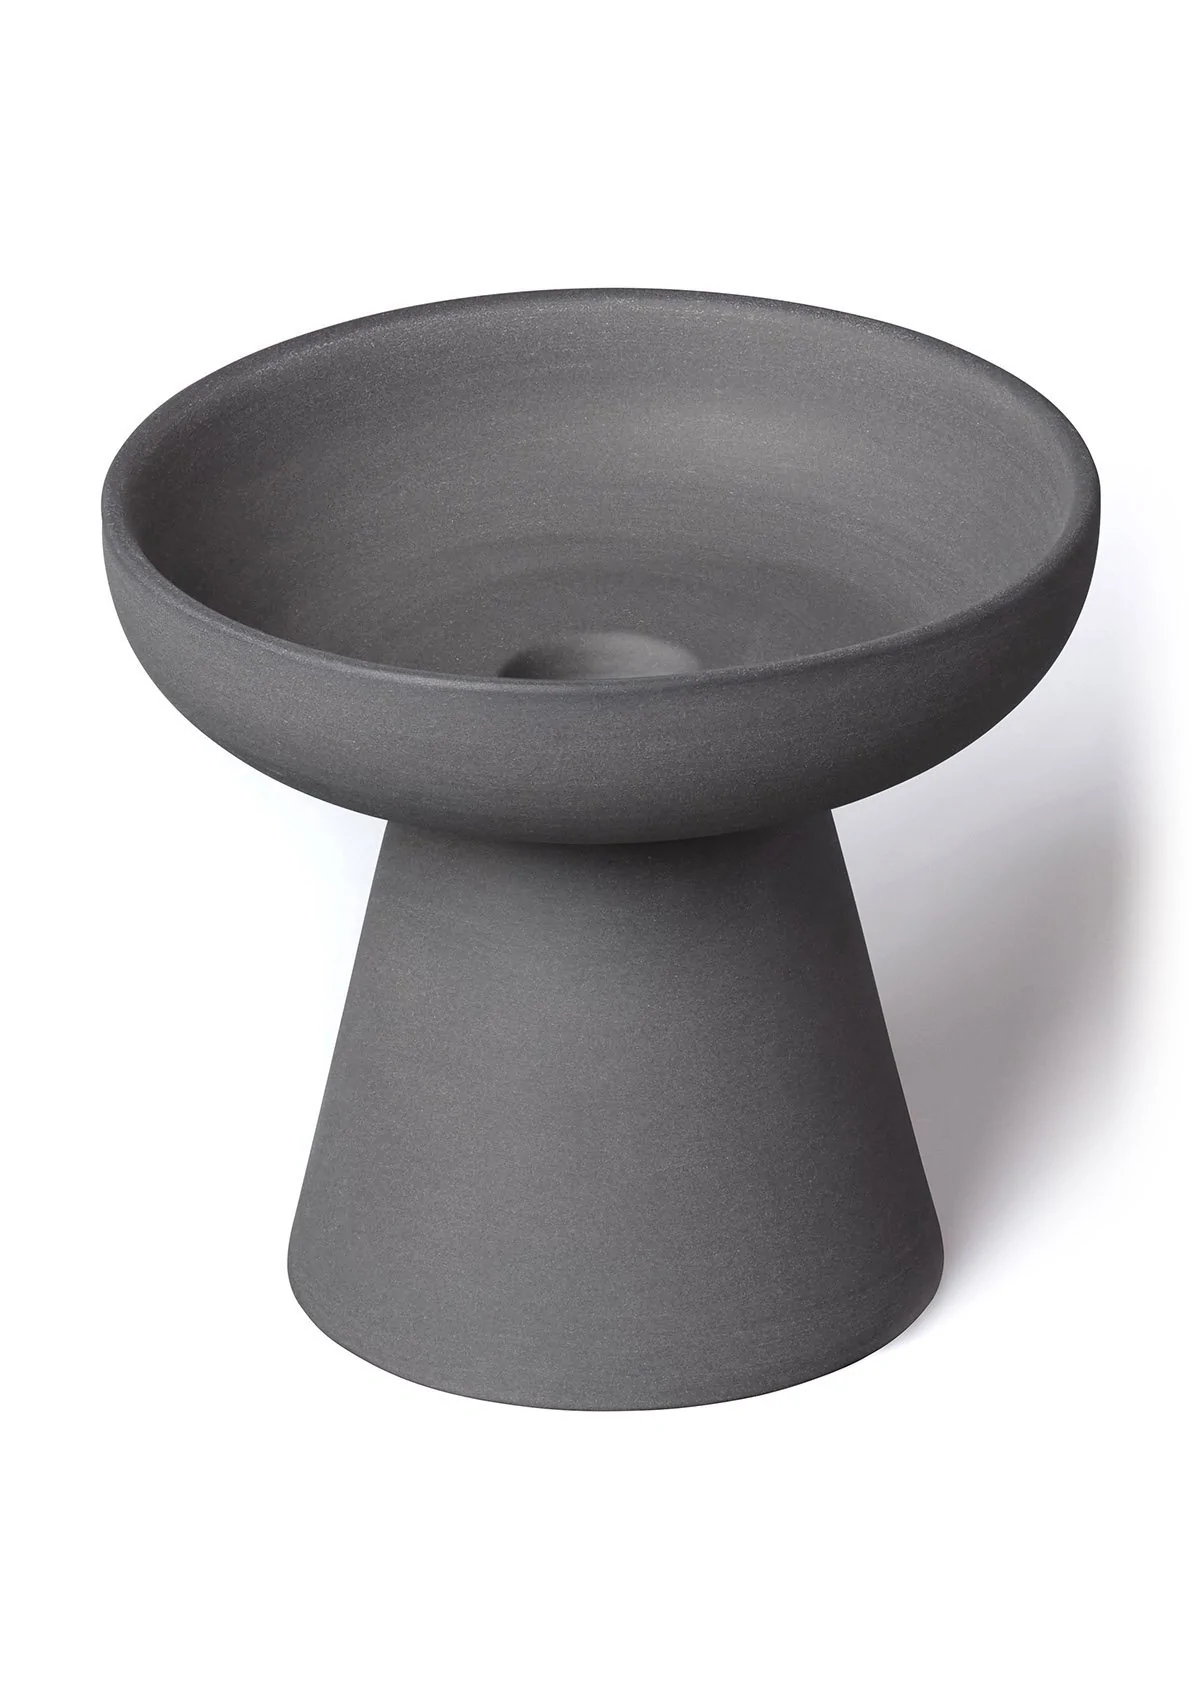 Aery Porcini Small Candle Holder In Charcoal Matt Clay